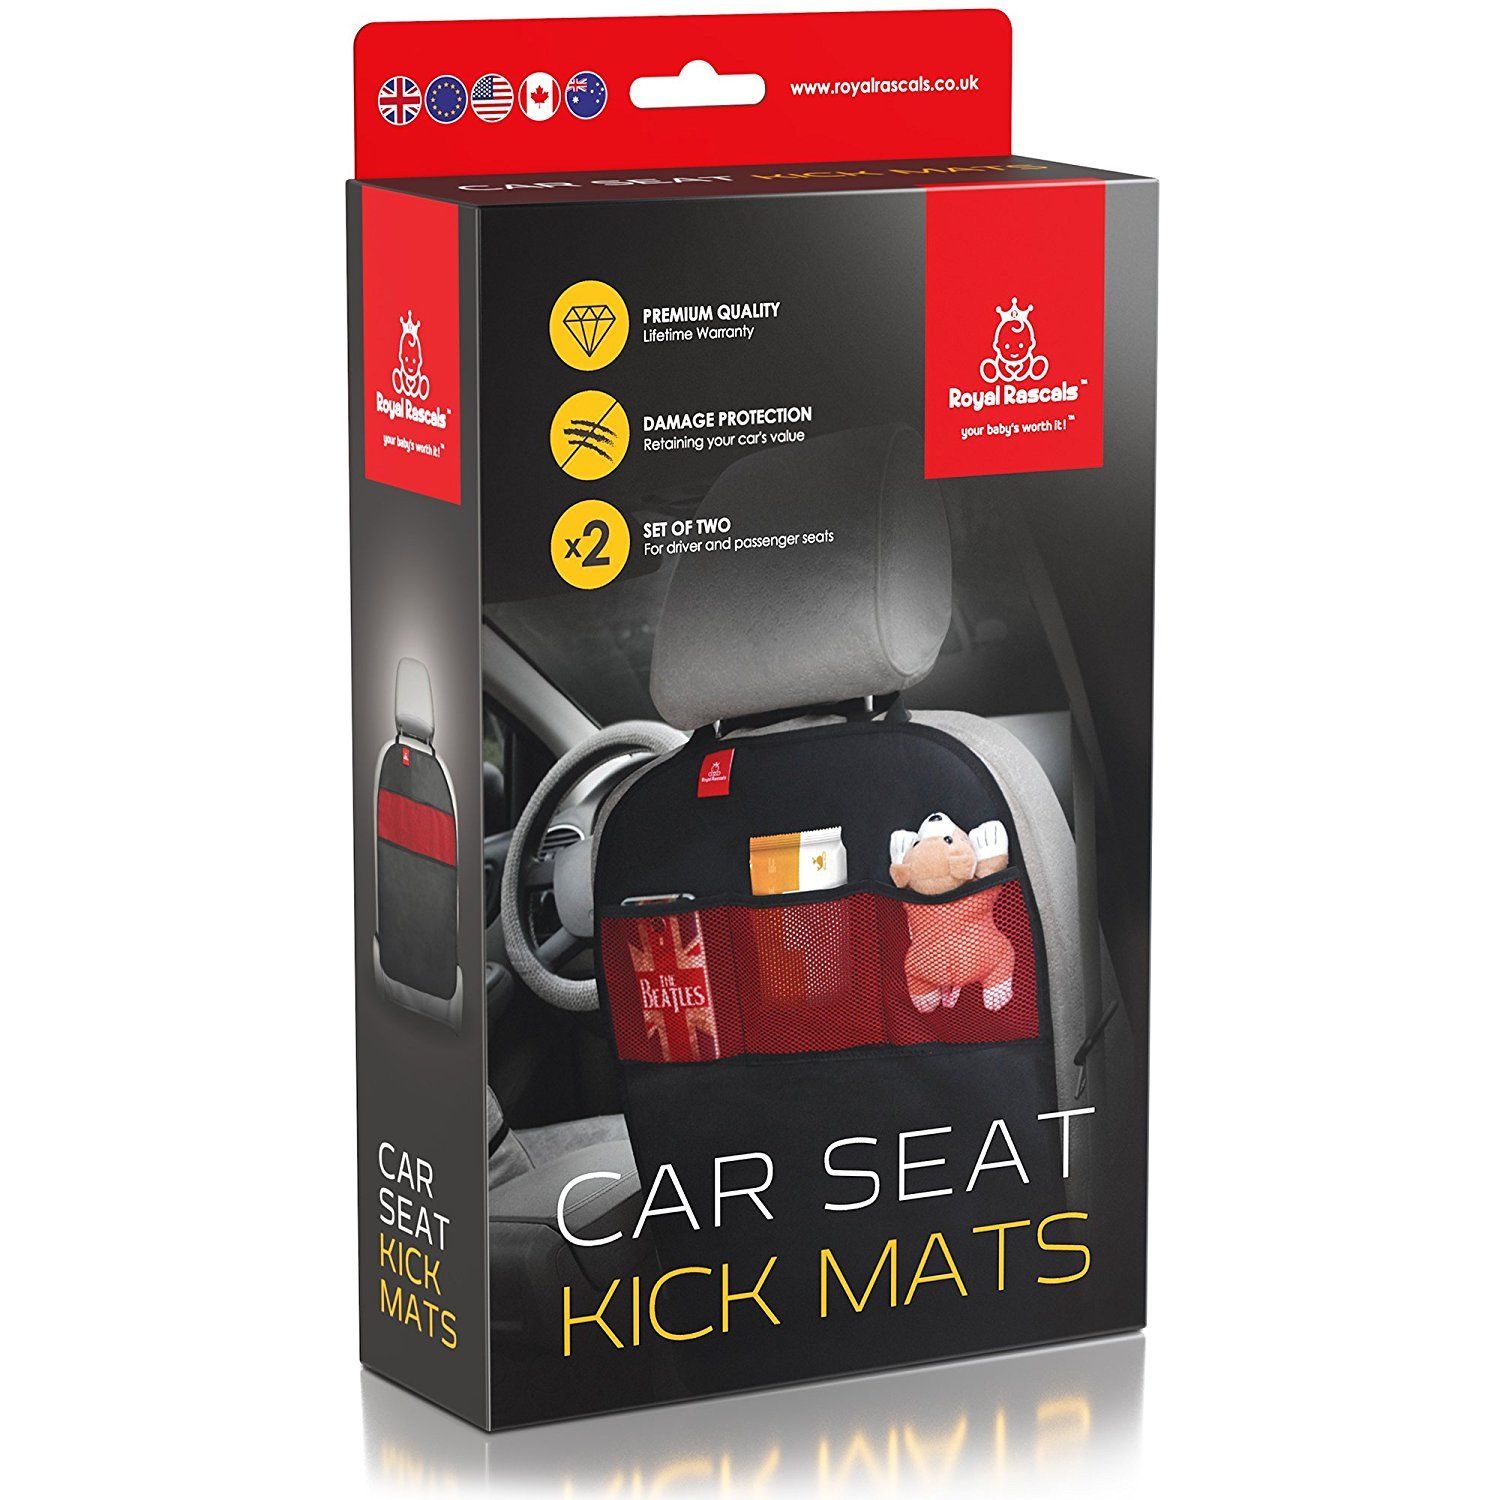 ROYAL RASCALS Kick Mats x2 | Car Seat Upholstery Protector | Organiser Pockets | Universal size | Heavy Duty Kick and Stain Protection - image 4 of 6